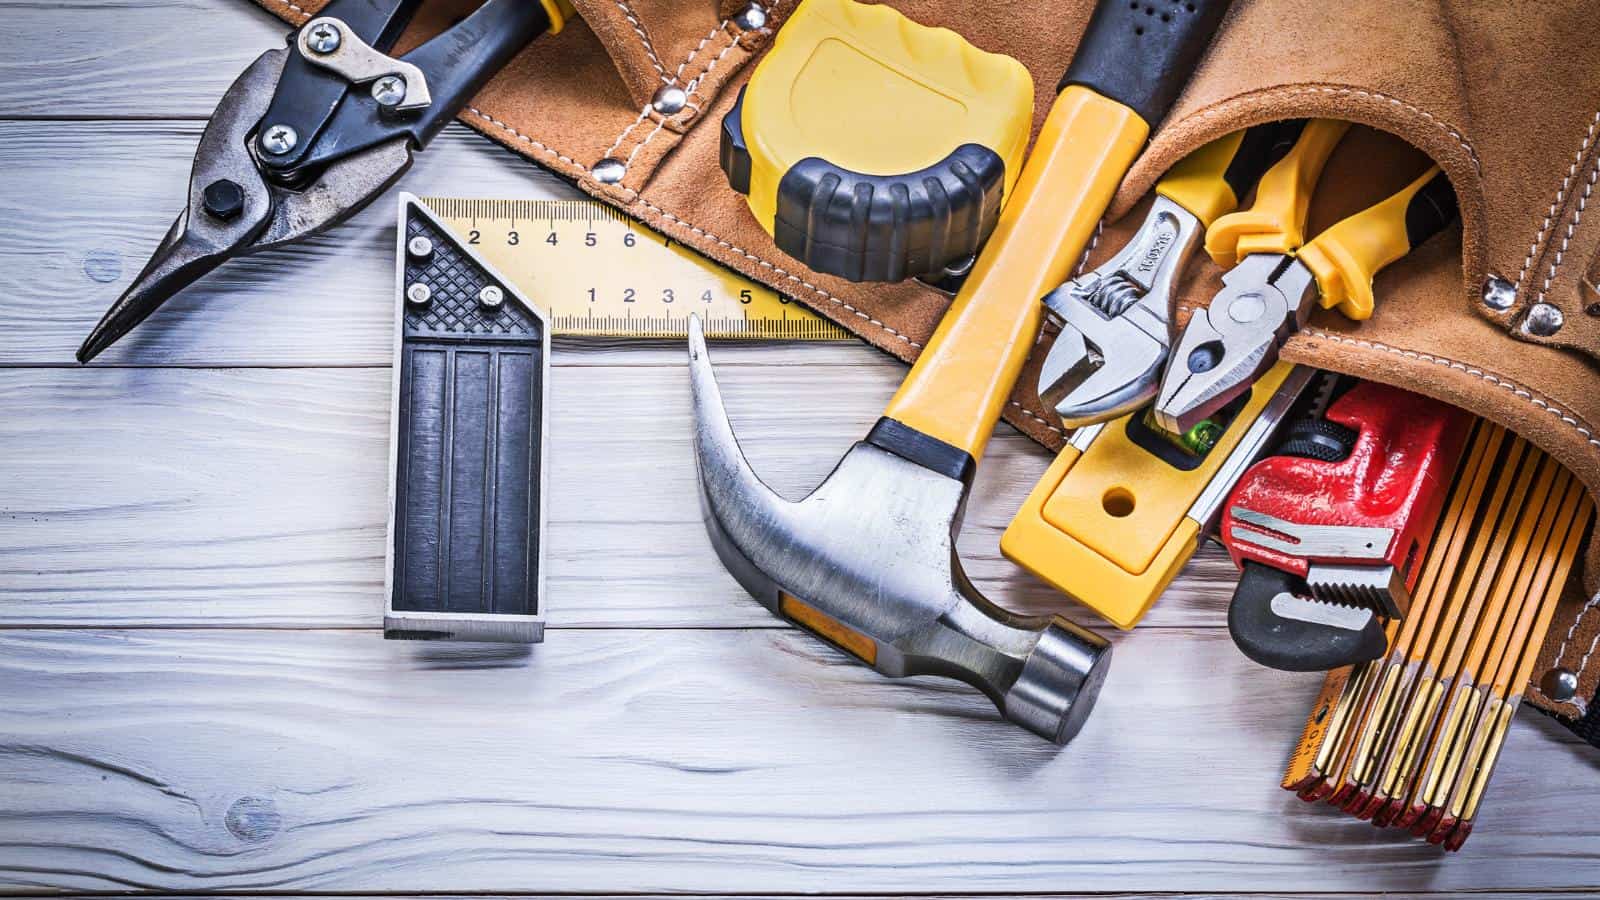 <p>The tools you find at Walmart can be more affordable, but they may not withstand demanding work. Durable tools that can handle the rigor of heavy-duty tasks usually come from hardware stores and are worth the extra cost.</p>